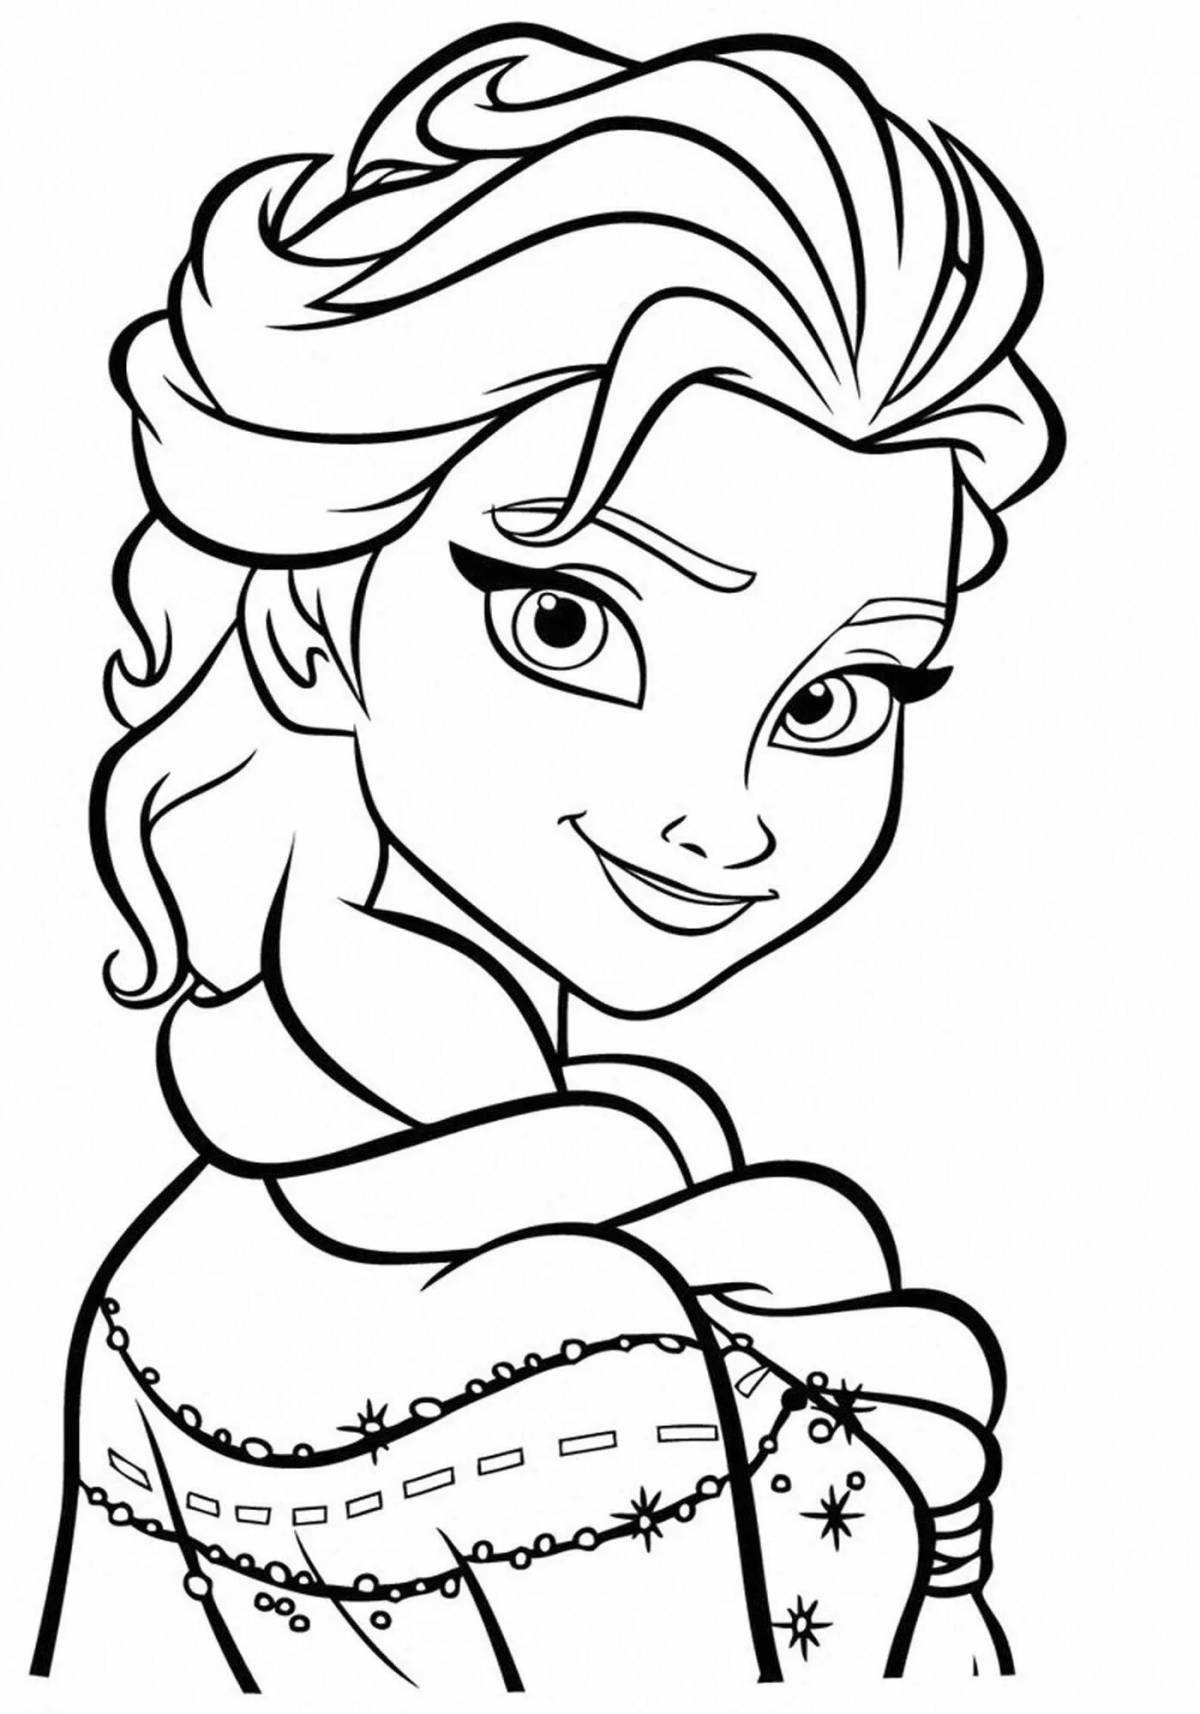 Elsa fun coloring book for kids 5-6 years old